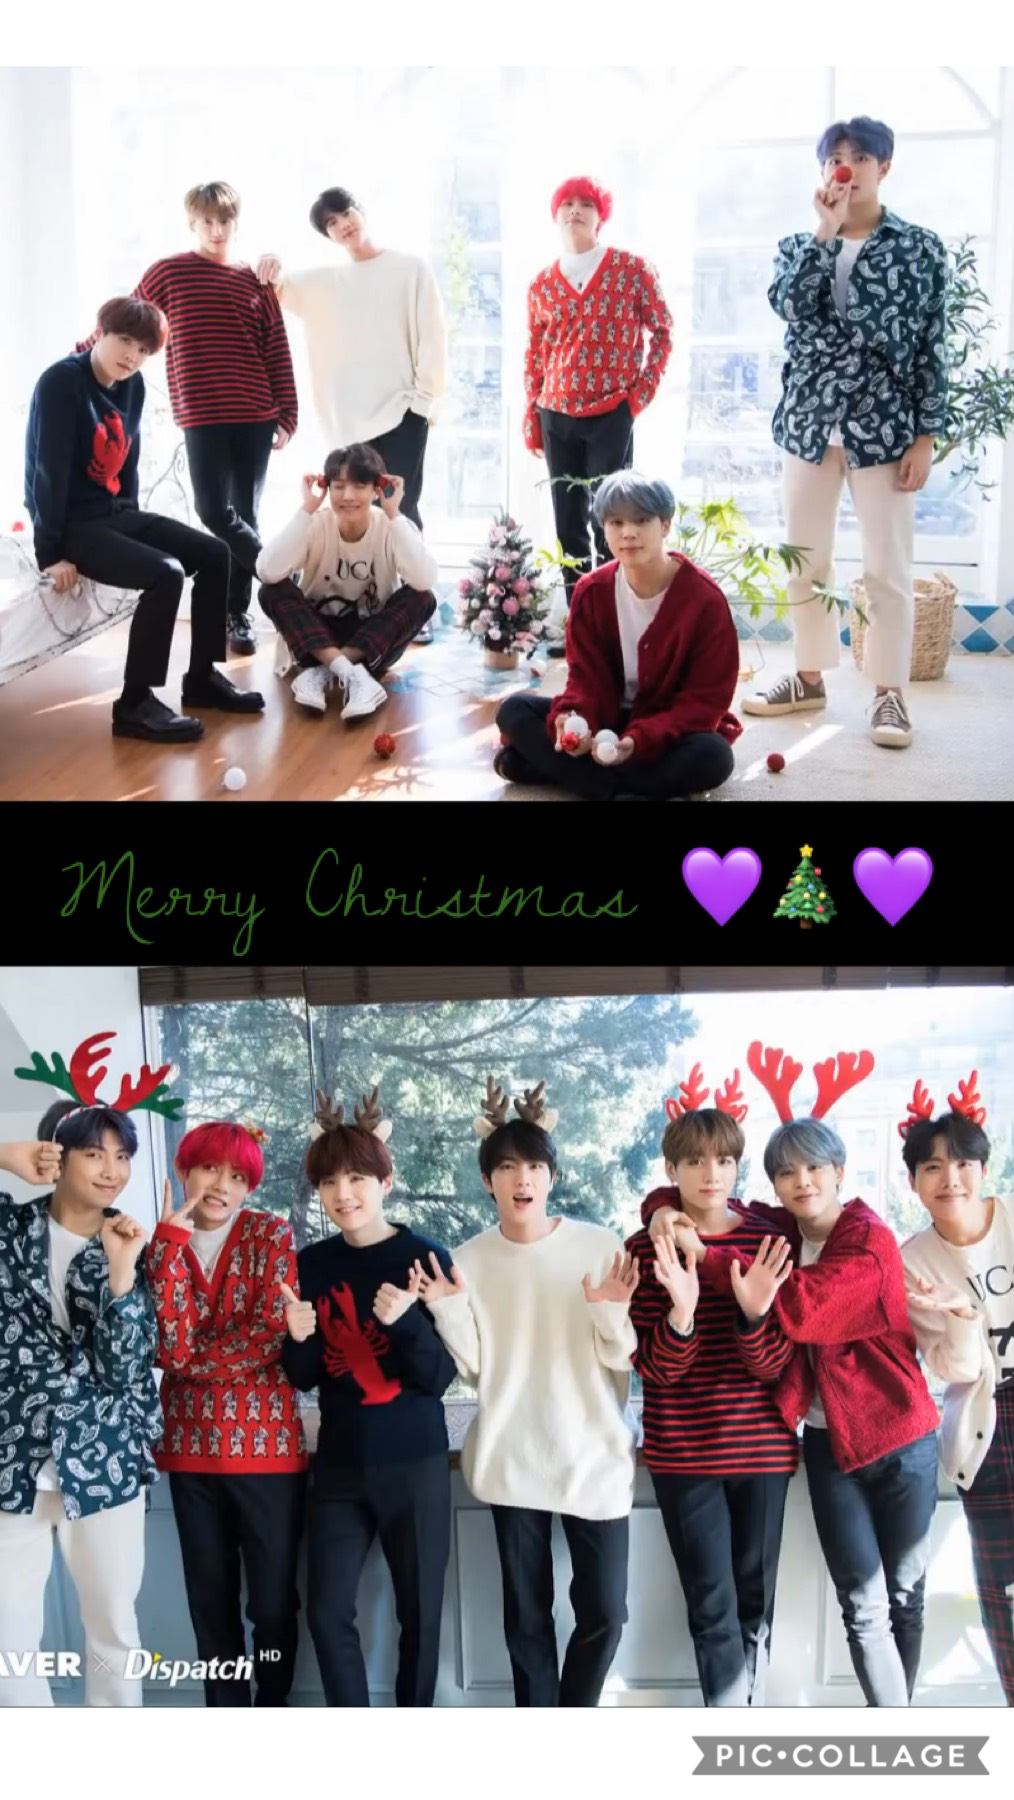 This is my Christmas post...I know it's bad but I was in the car driving to Florida while making it so whatever. I love bangtan and my followers 💜💜💜🎄merry Christmas 🎄 